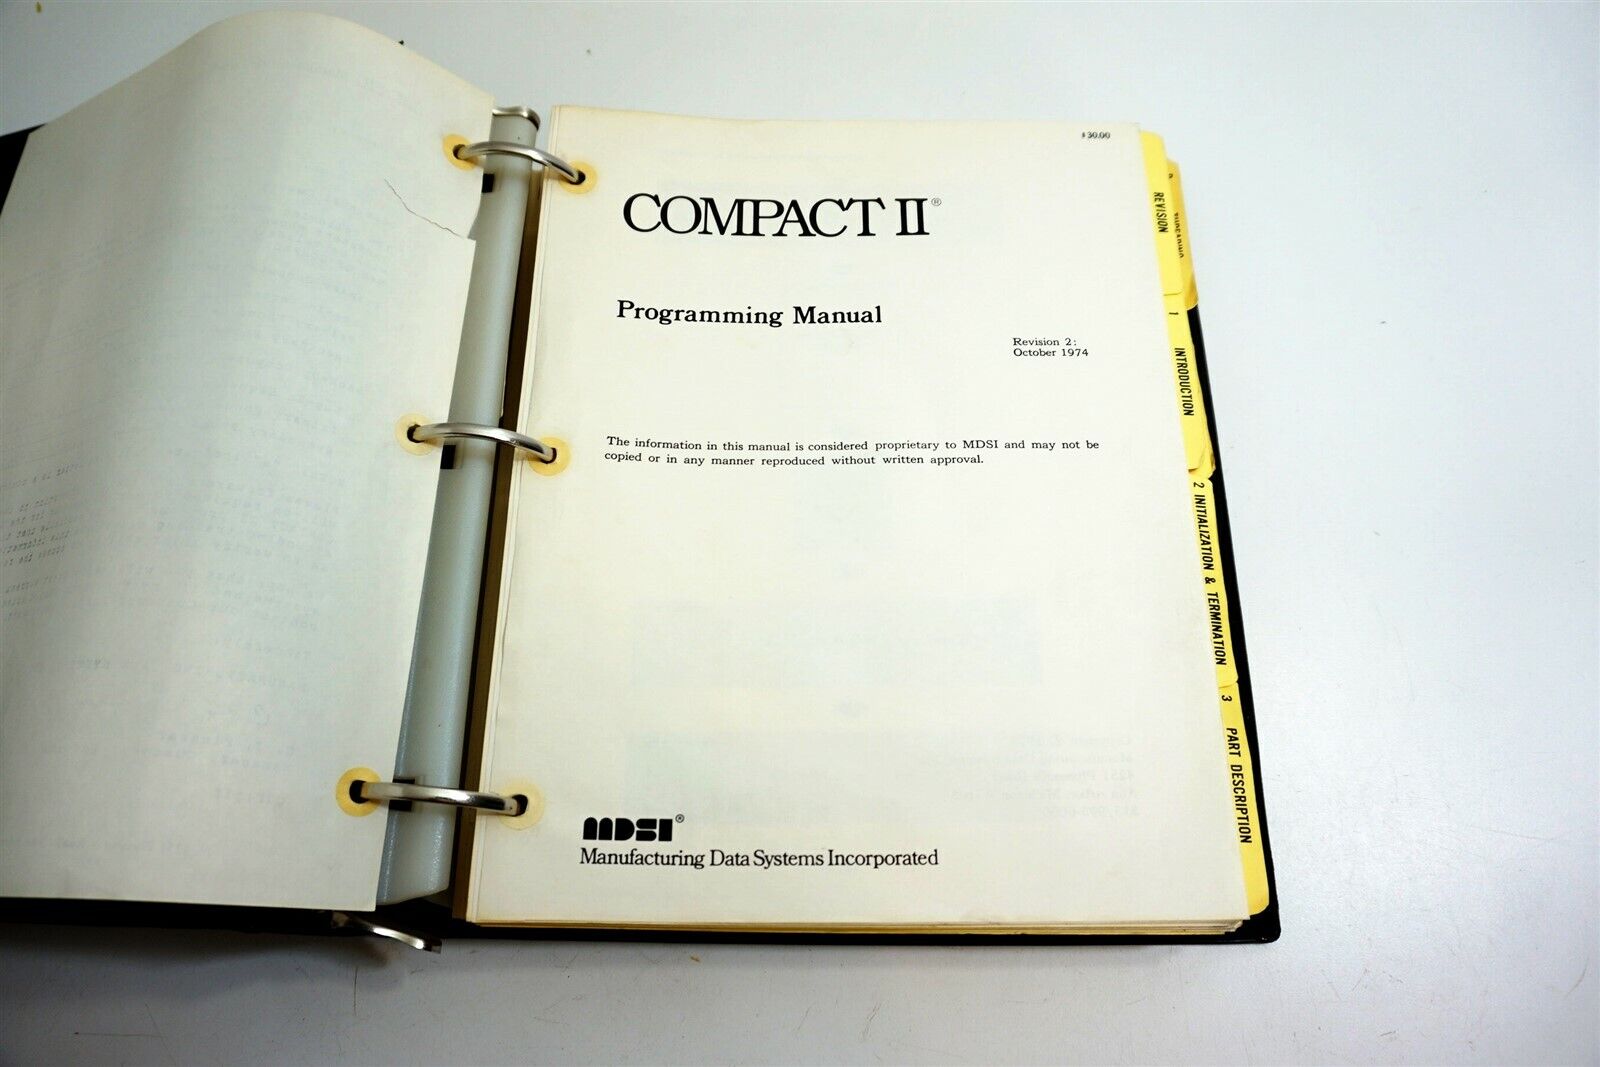 Vintage 1974 COMPACT II Programming Manual ~ Very Early computer book by MDSI